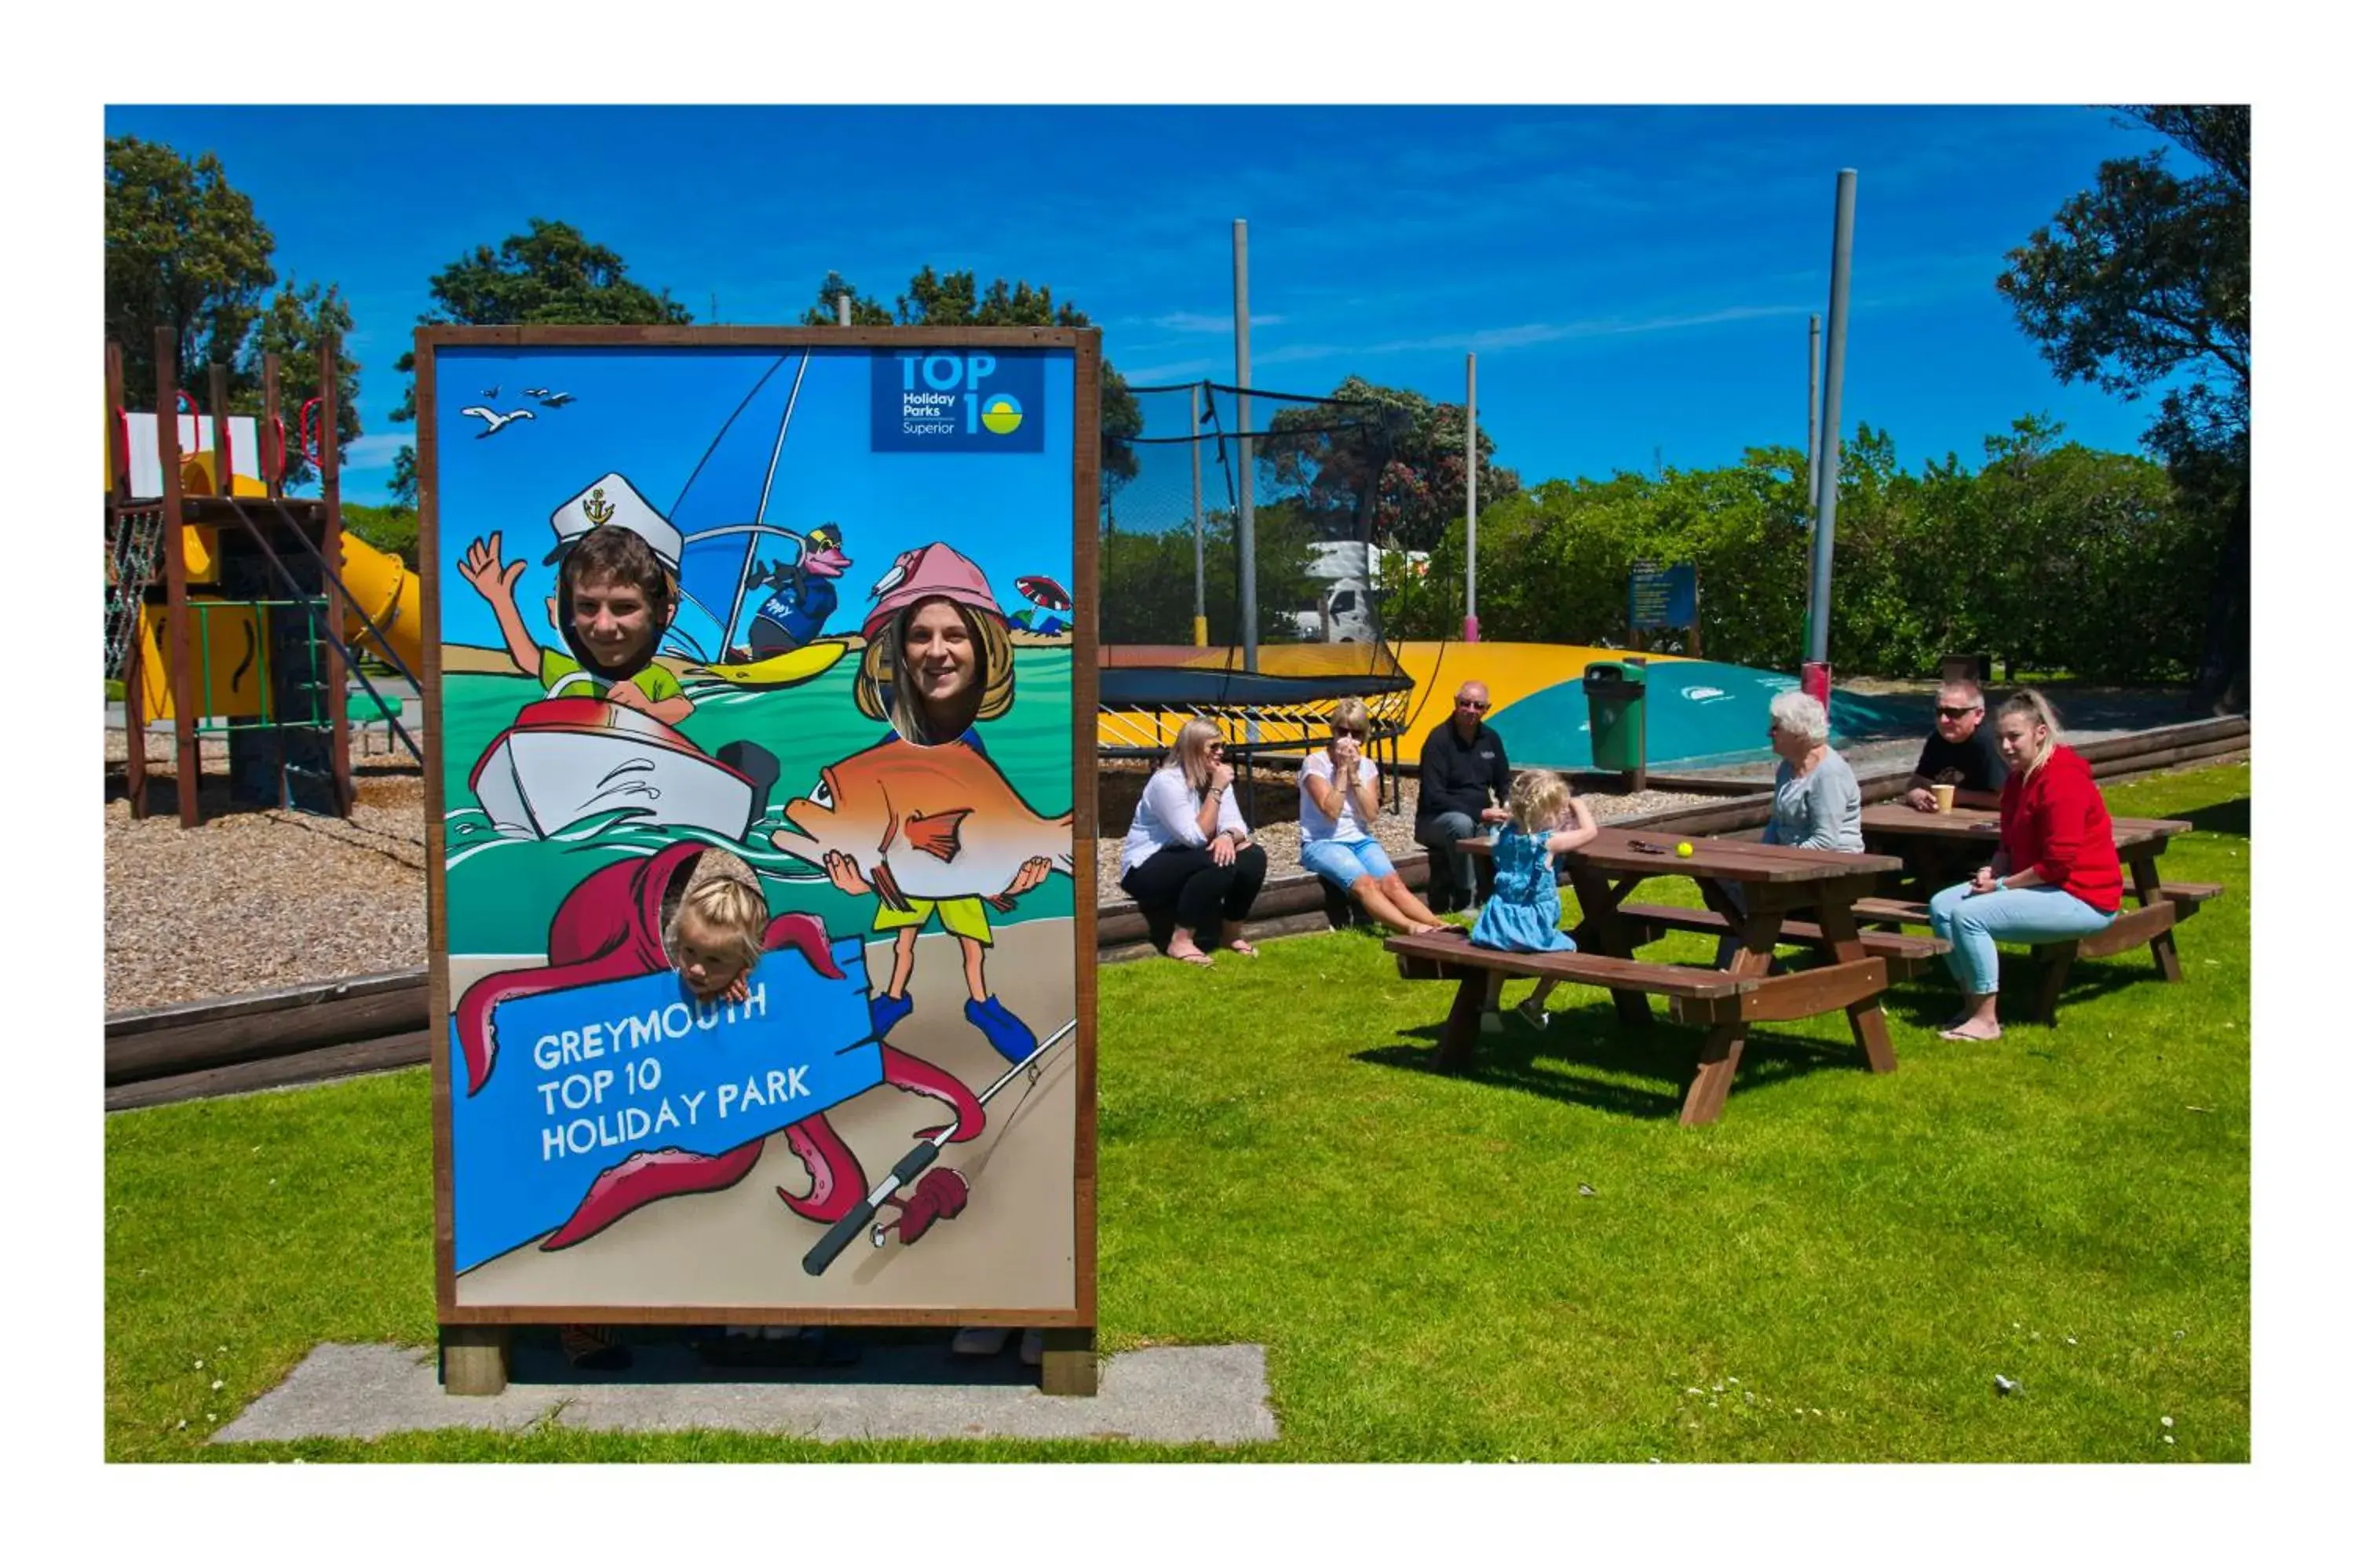 Children play ground in Greymouth Seaside TOP 10 Holiday Park